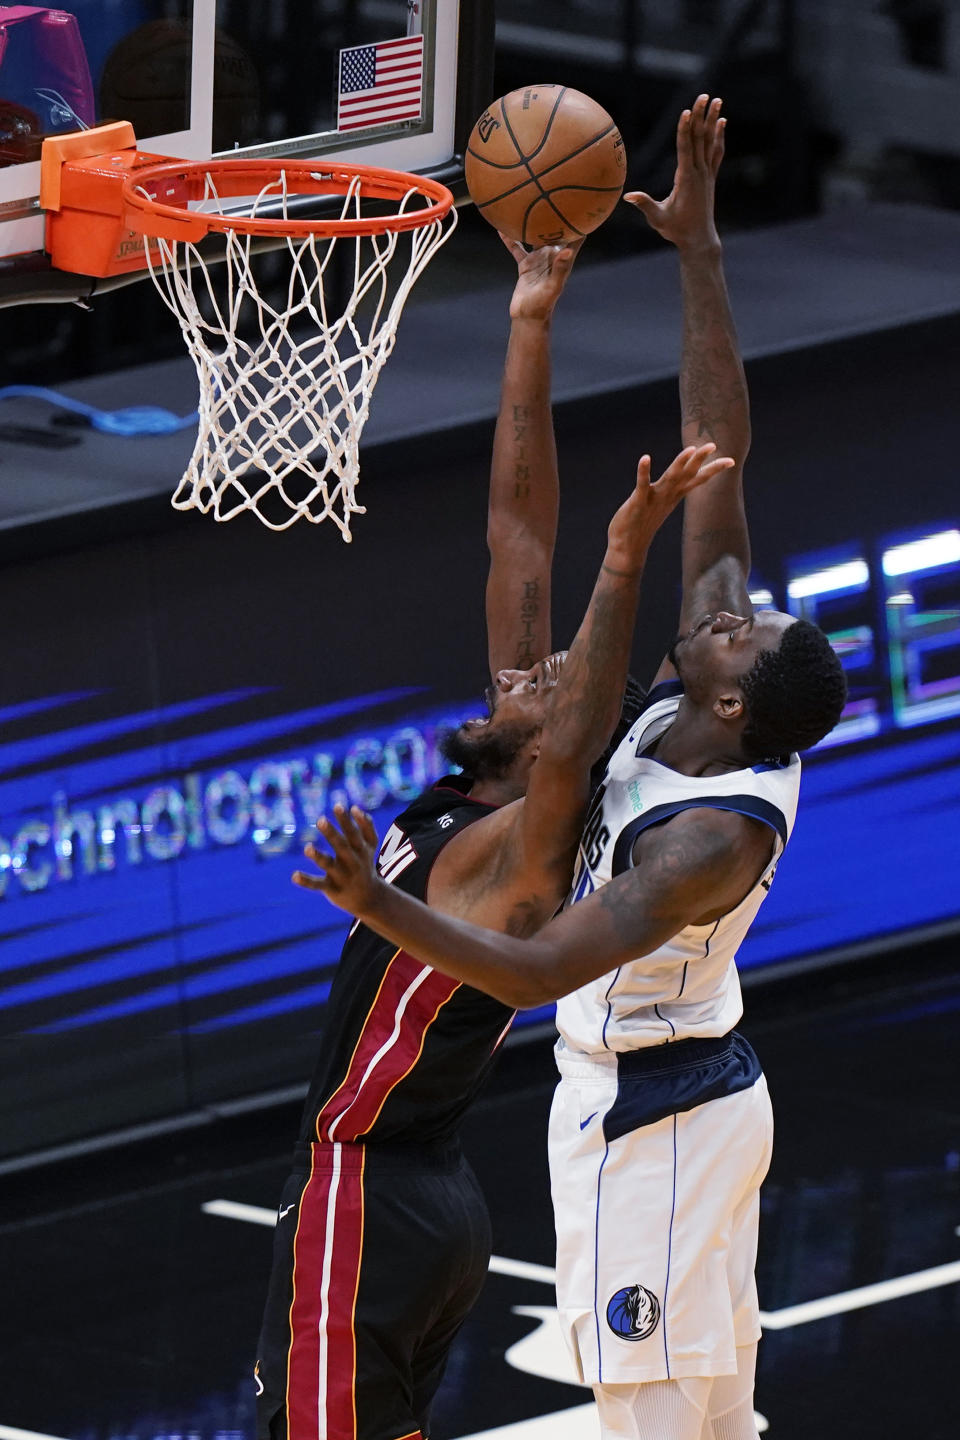 Miami Heat forward Trevor Ariza, left, goes up for a shot against Dallas Mavericks forward Dorian Finney-Smith during the first half of an NBA basketball game, Tuesday, May 4, 2021, in Miami. (AP Photo/Wilfredo Lee)